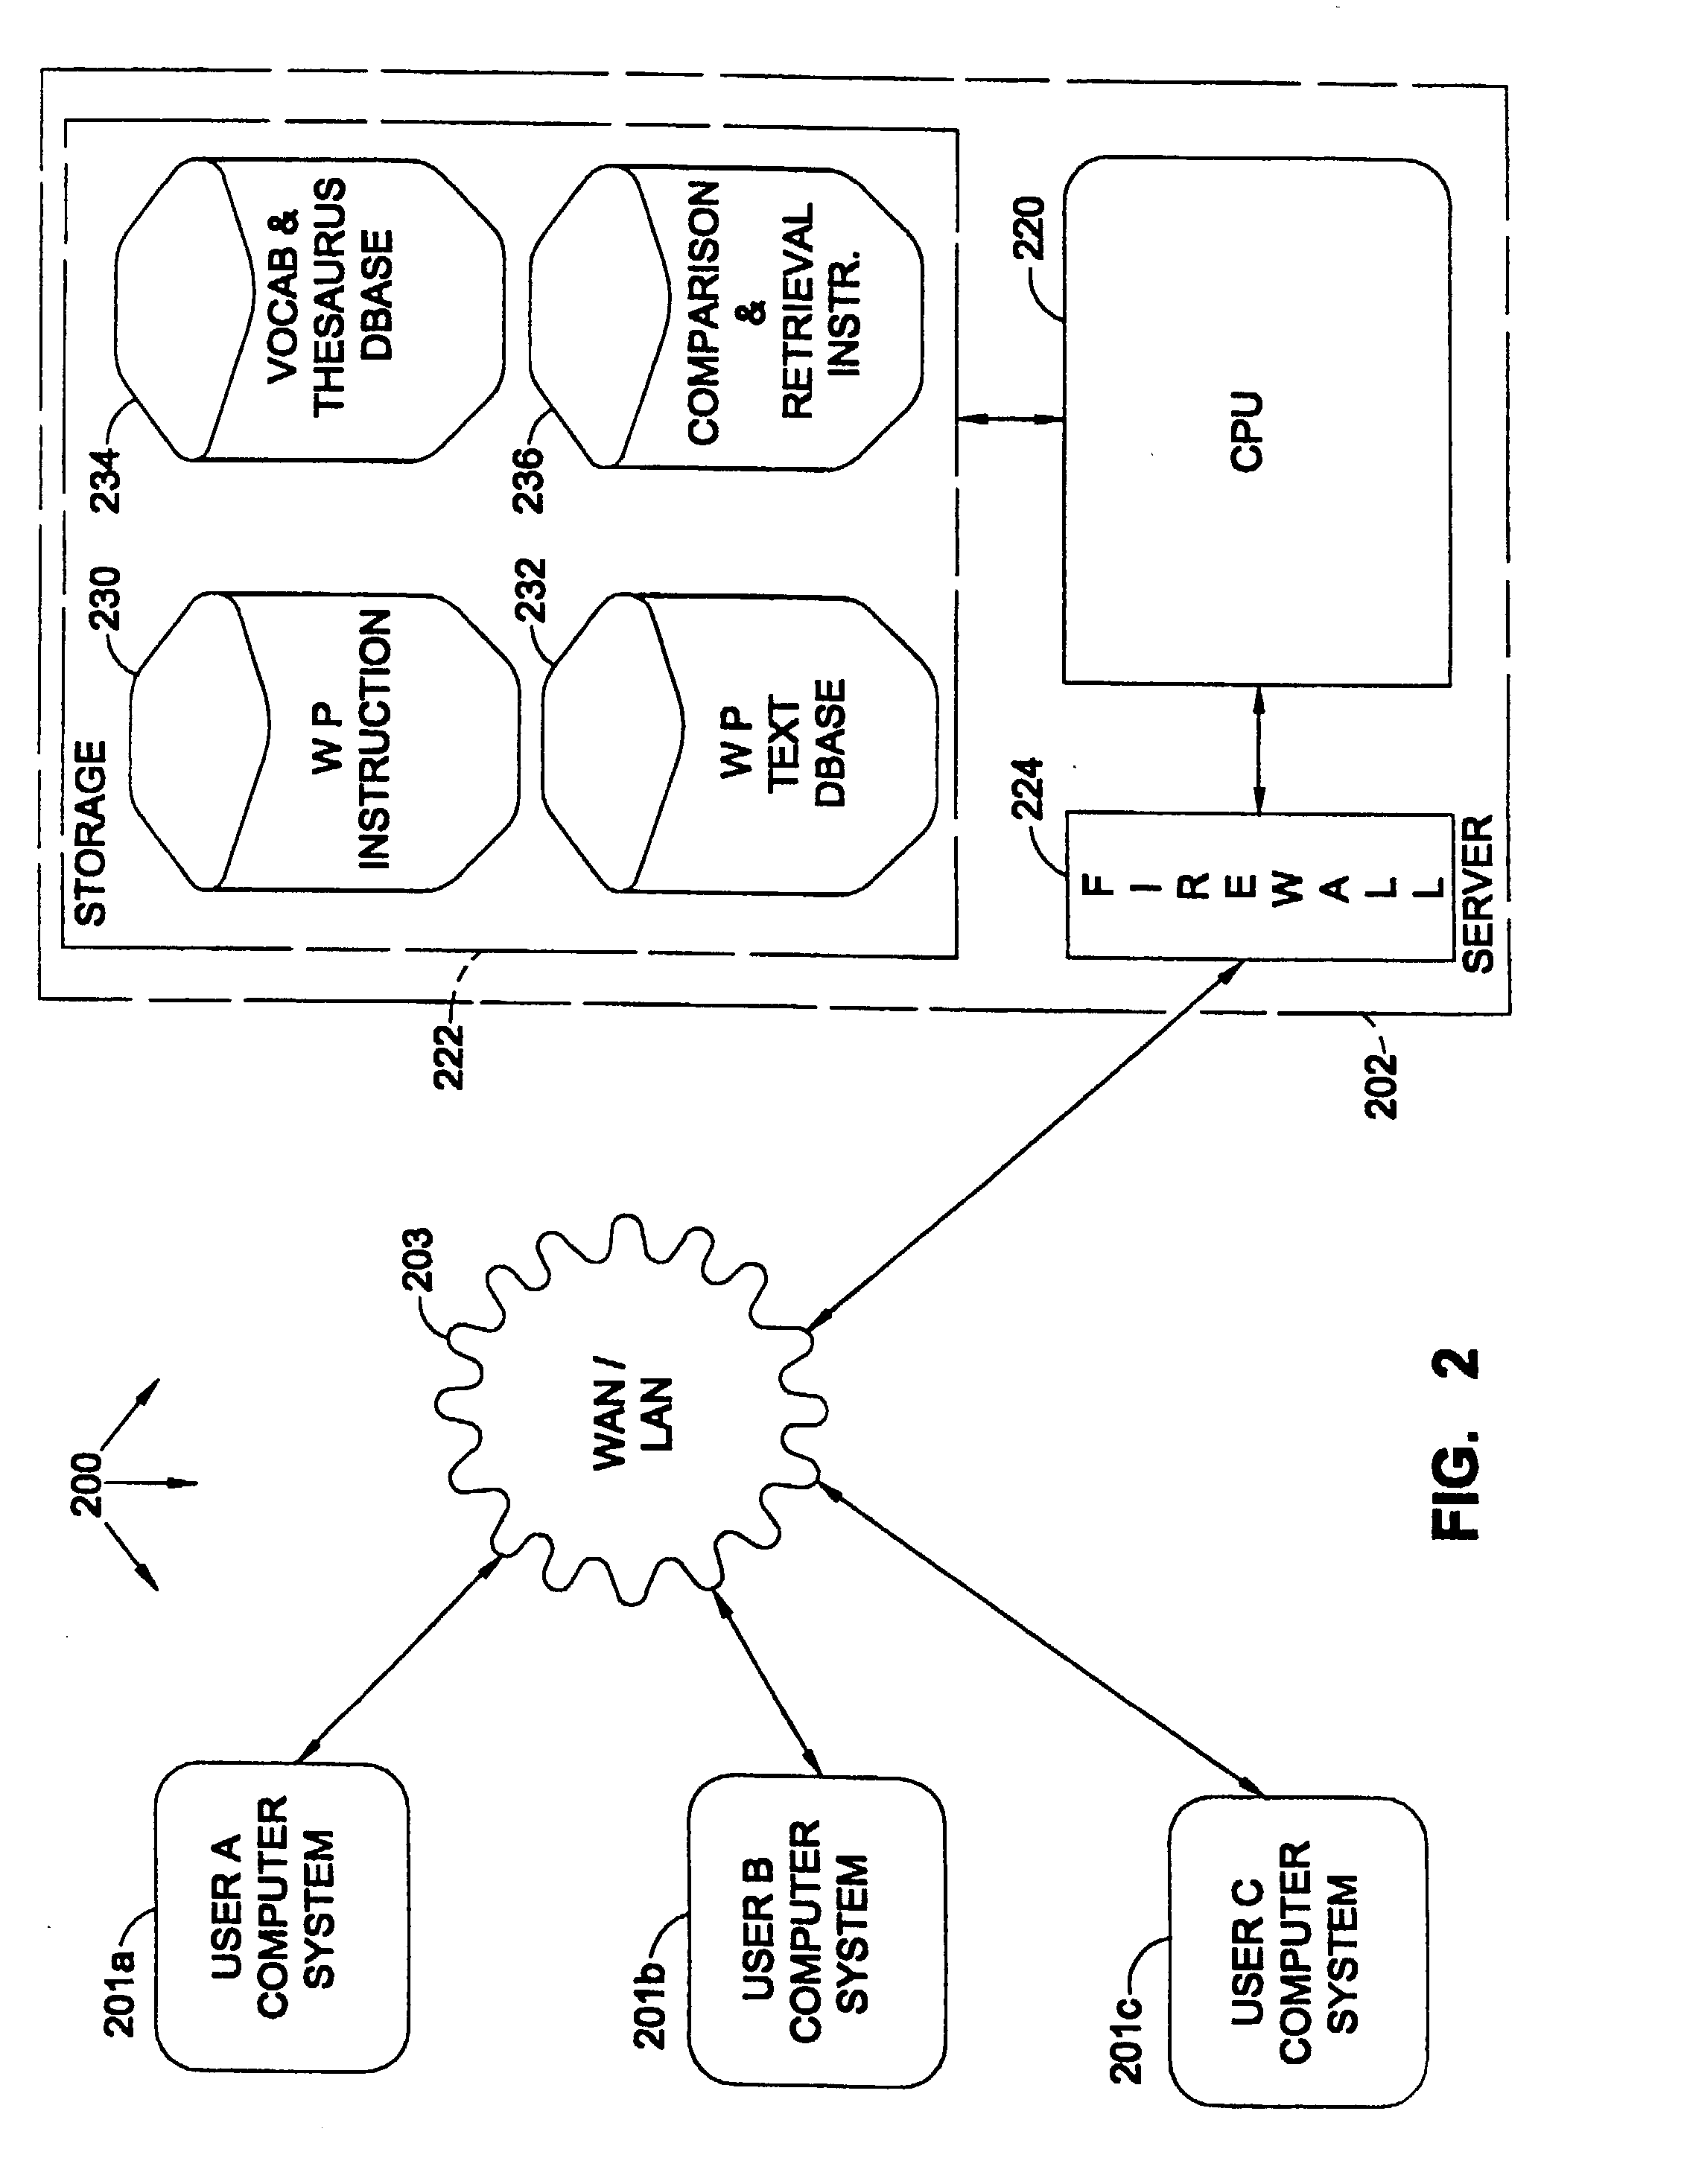 System and method for determining and controlling the impact of text